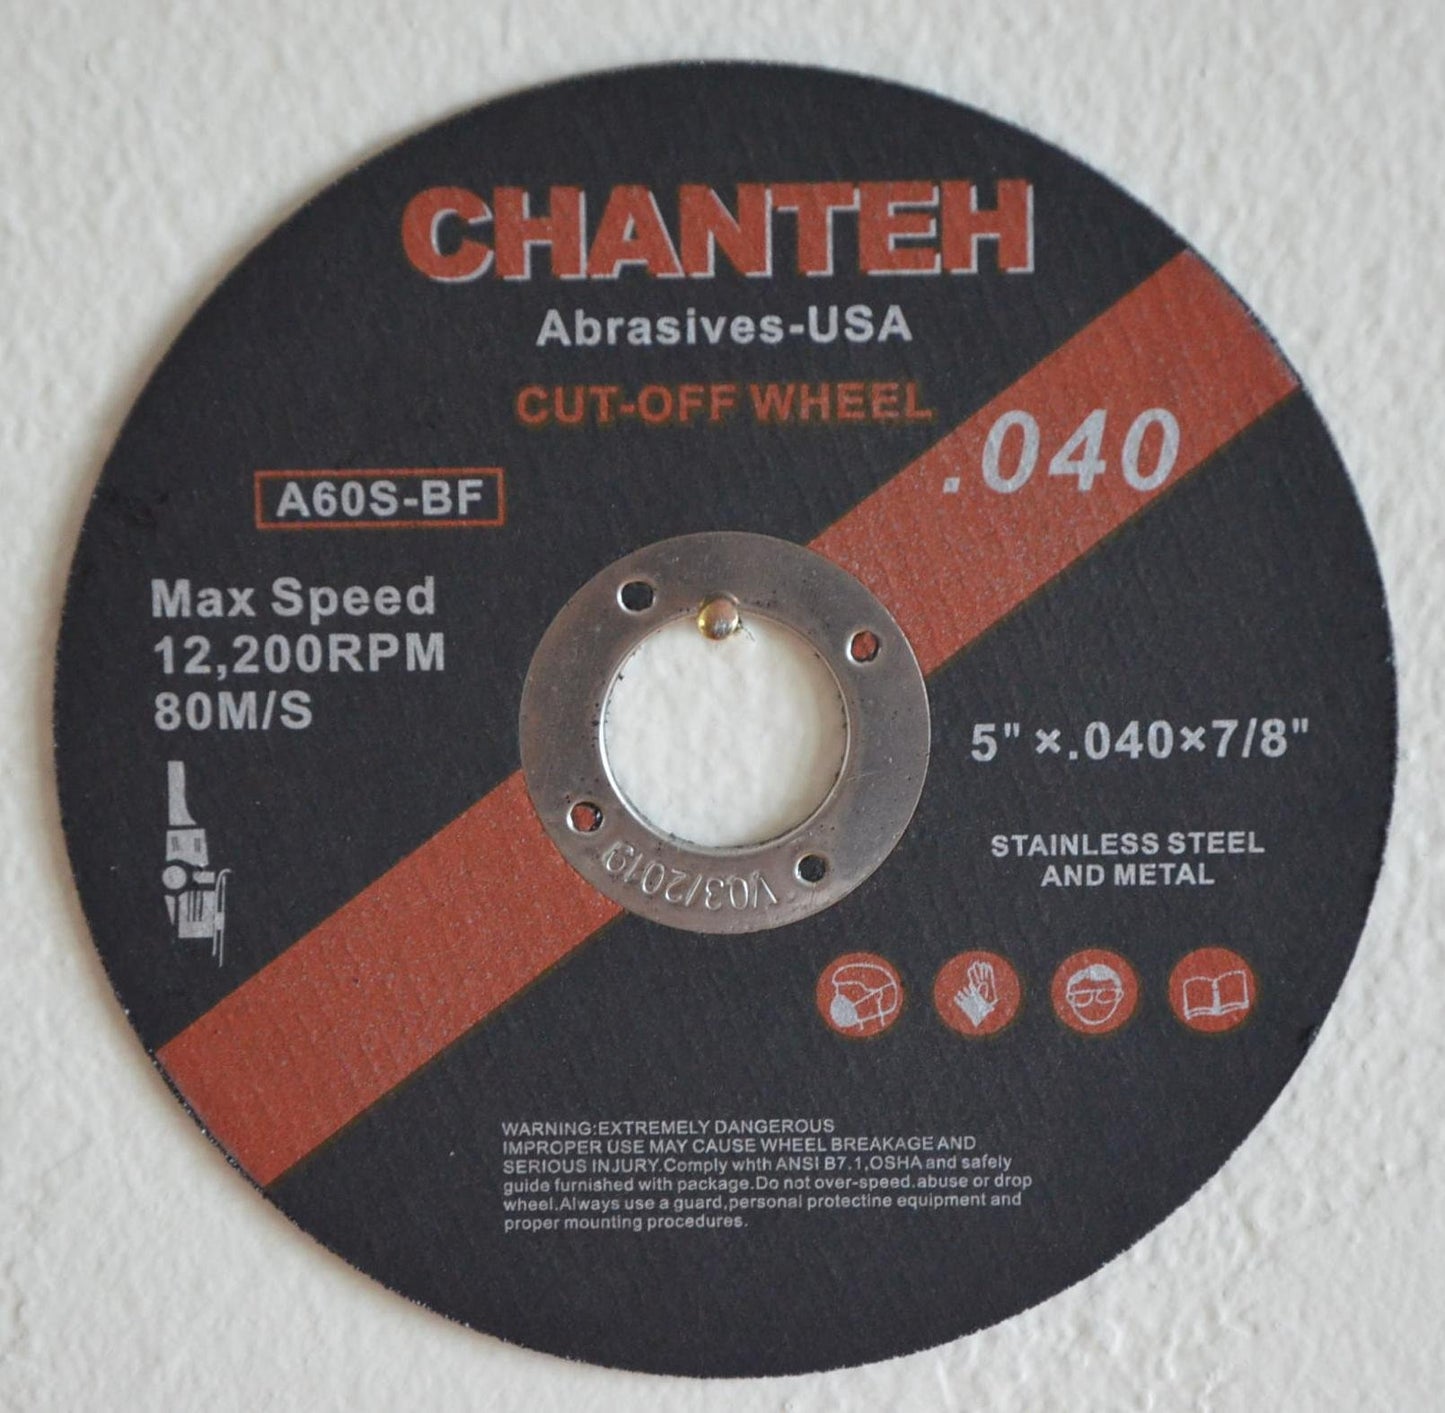 5" x .040" x 7/8" CUT-OFF WHEELS for Stainless Steel &.Metal Cutting Disc (25 PACK)